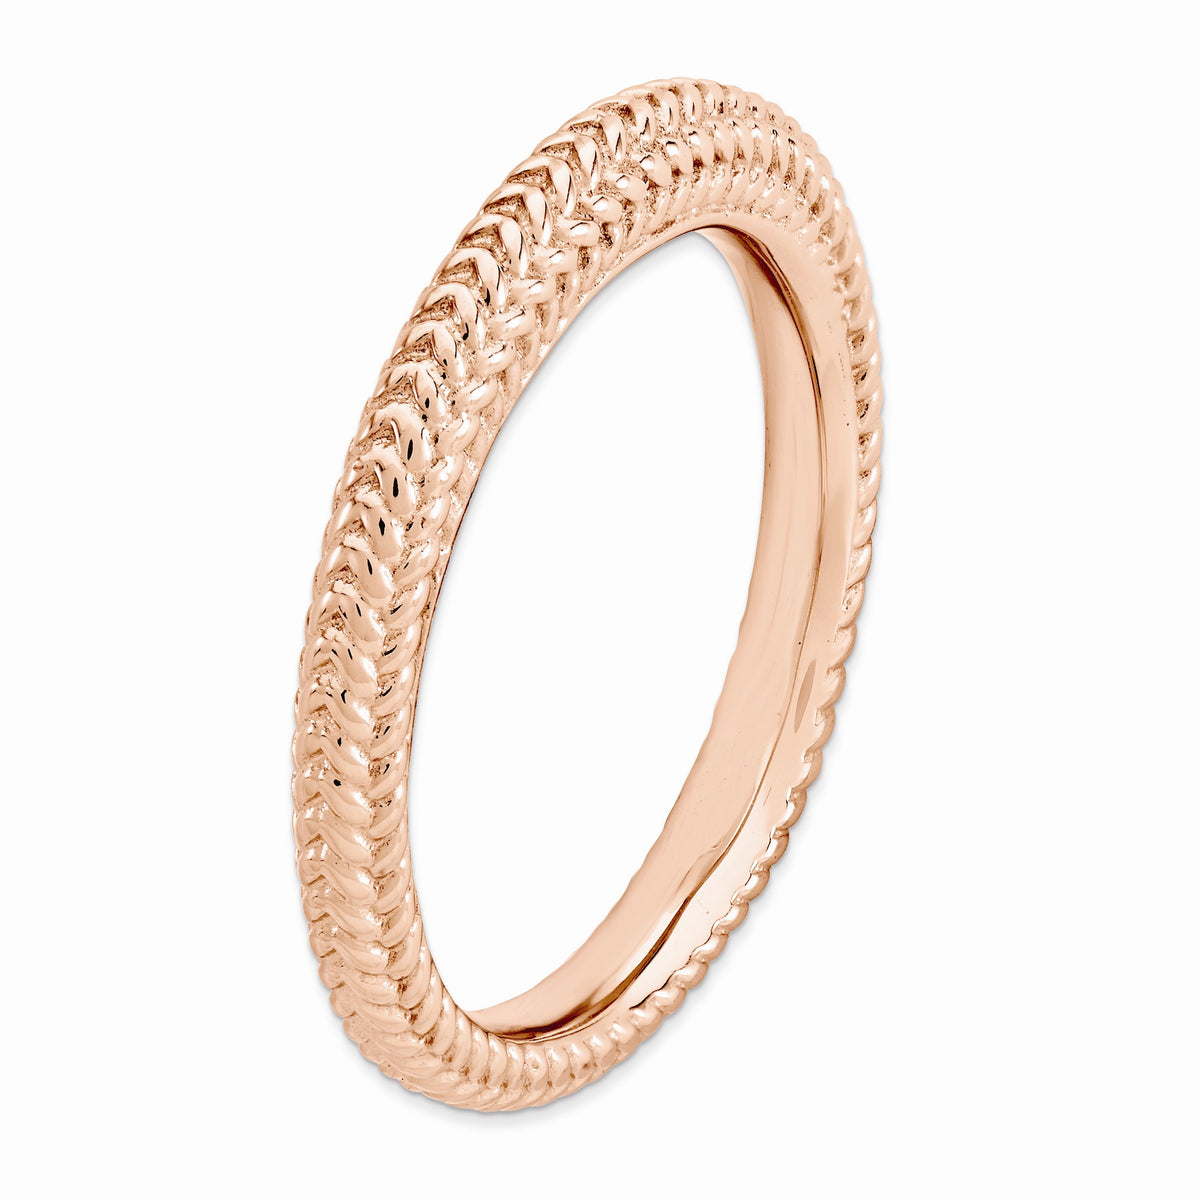 Alternate view of the Stackable 14K Rose Gold Plated Silver Domed Wheat Band by The Black Bow Jewelry Co.